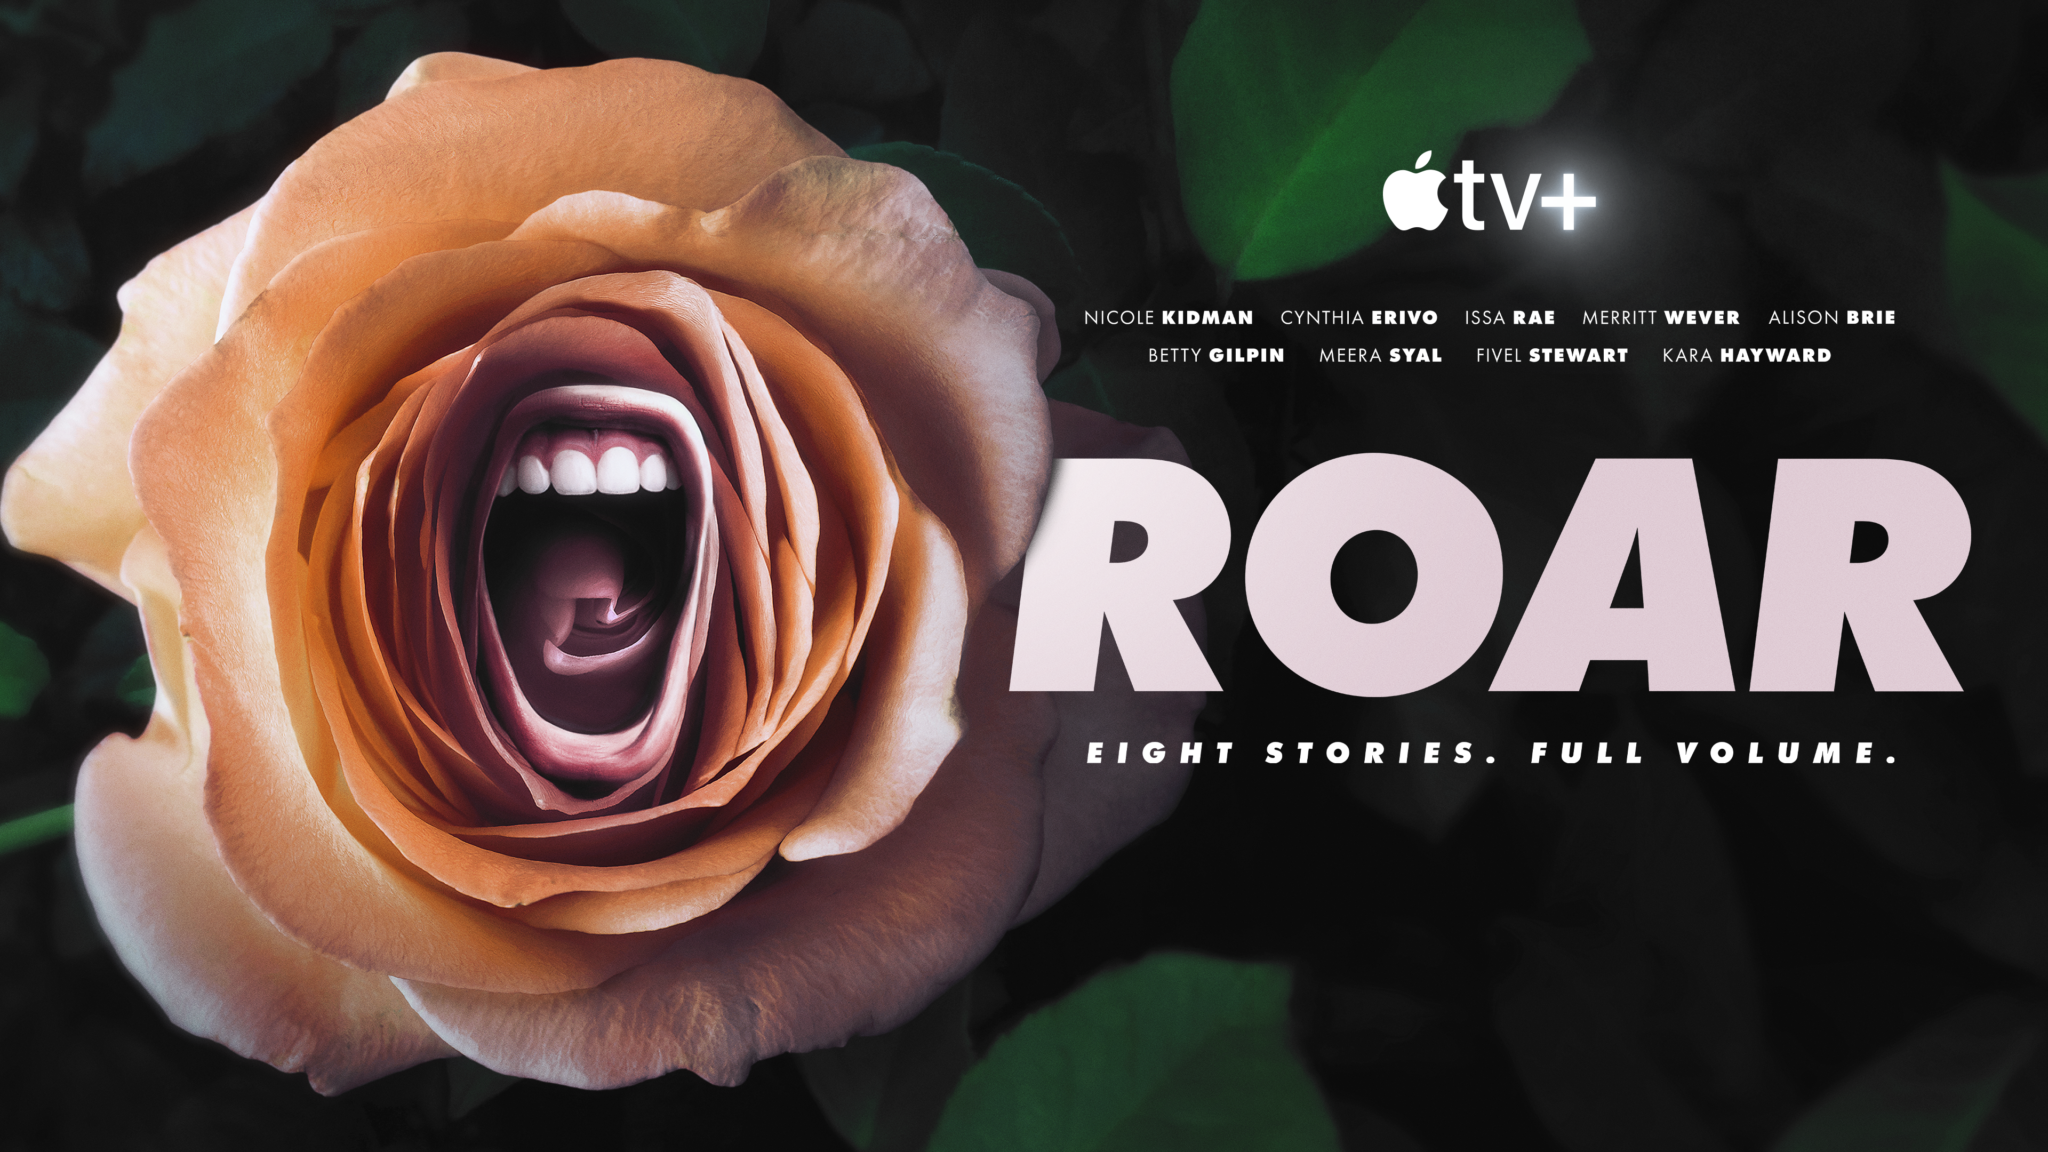 Star-studded anthology series “Roar” Now Streaming on Apple TV Plus